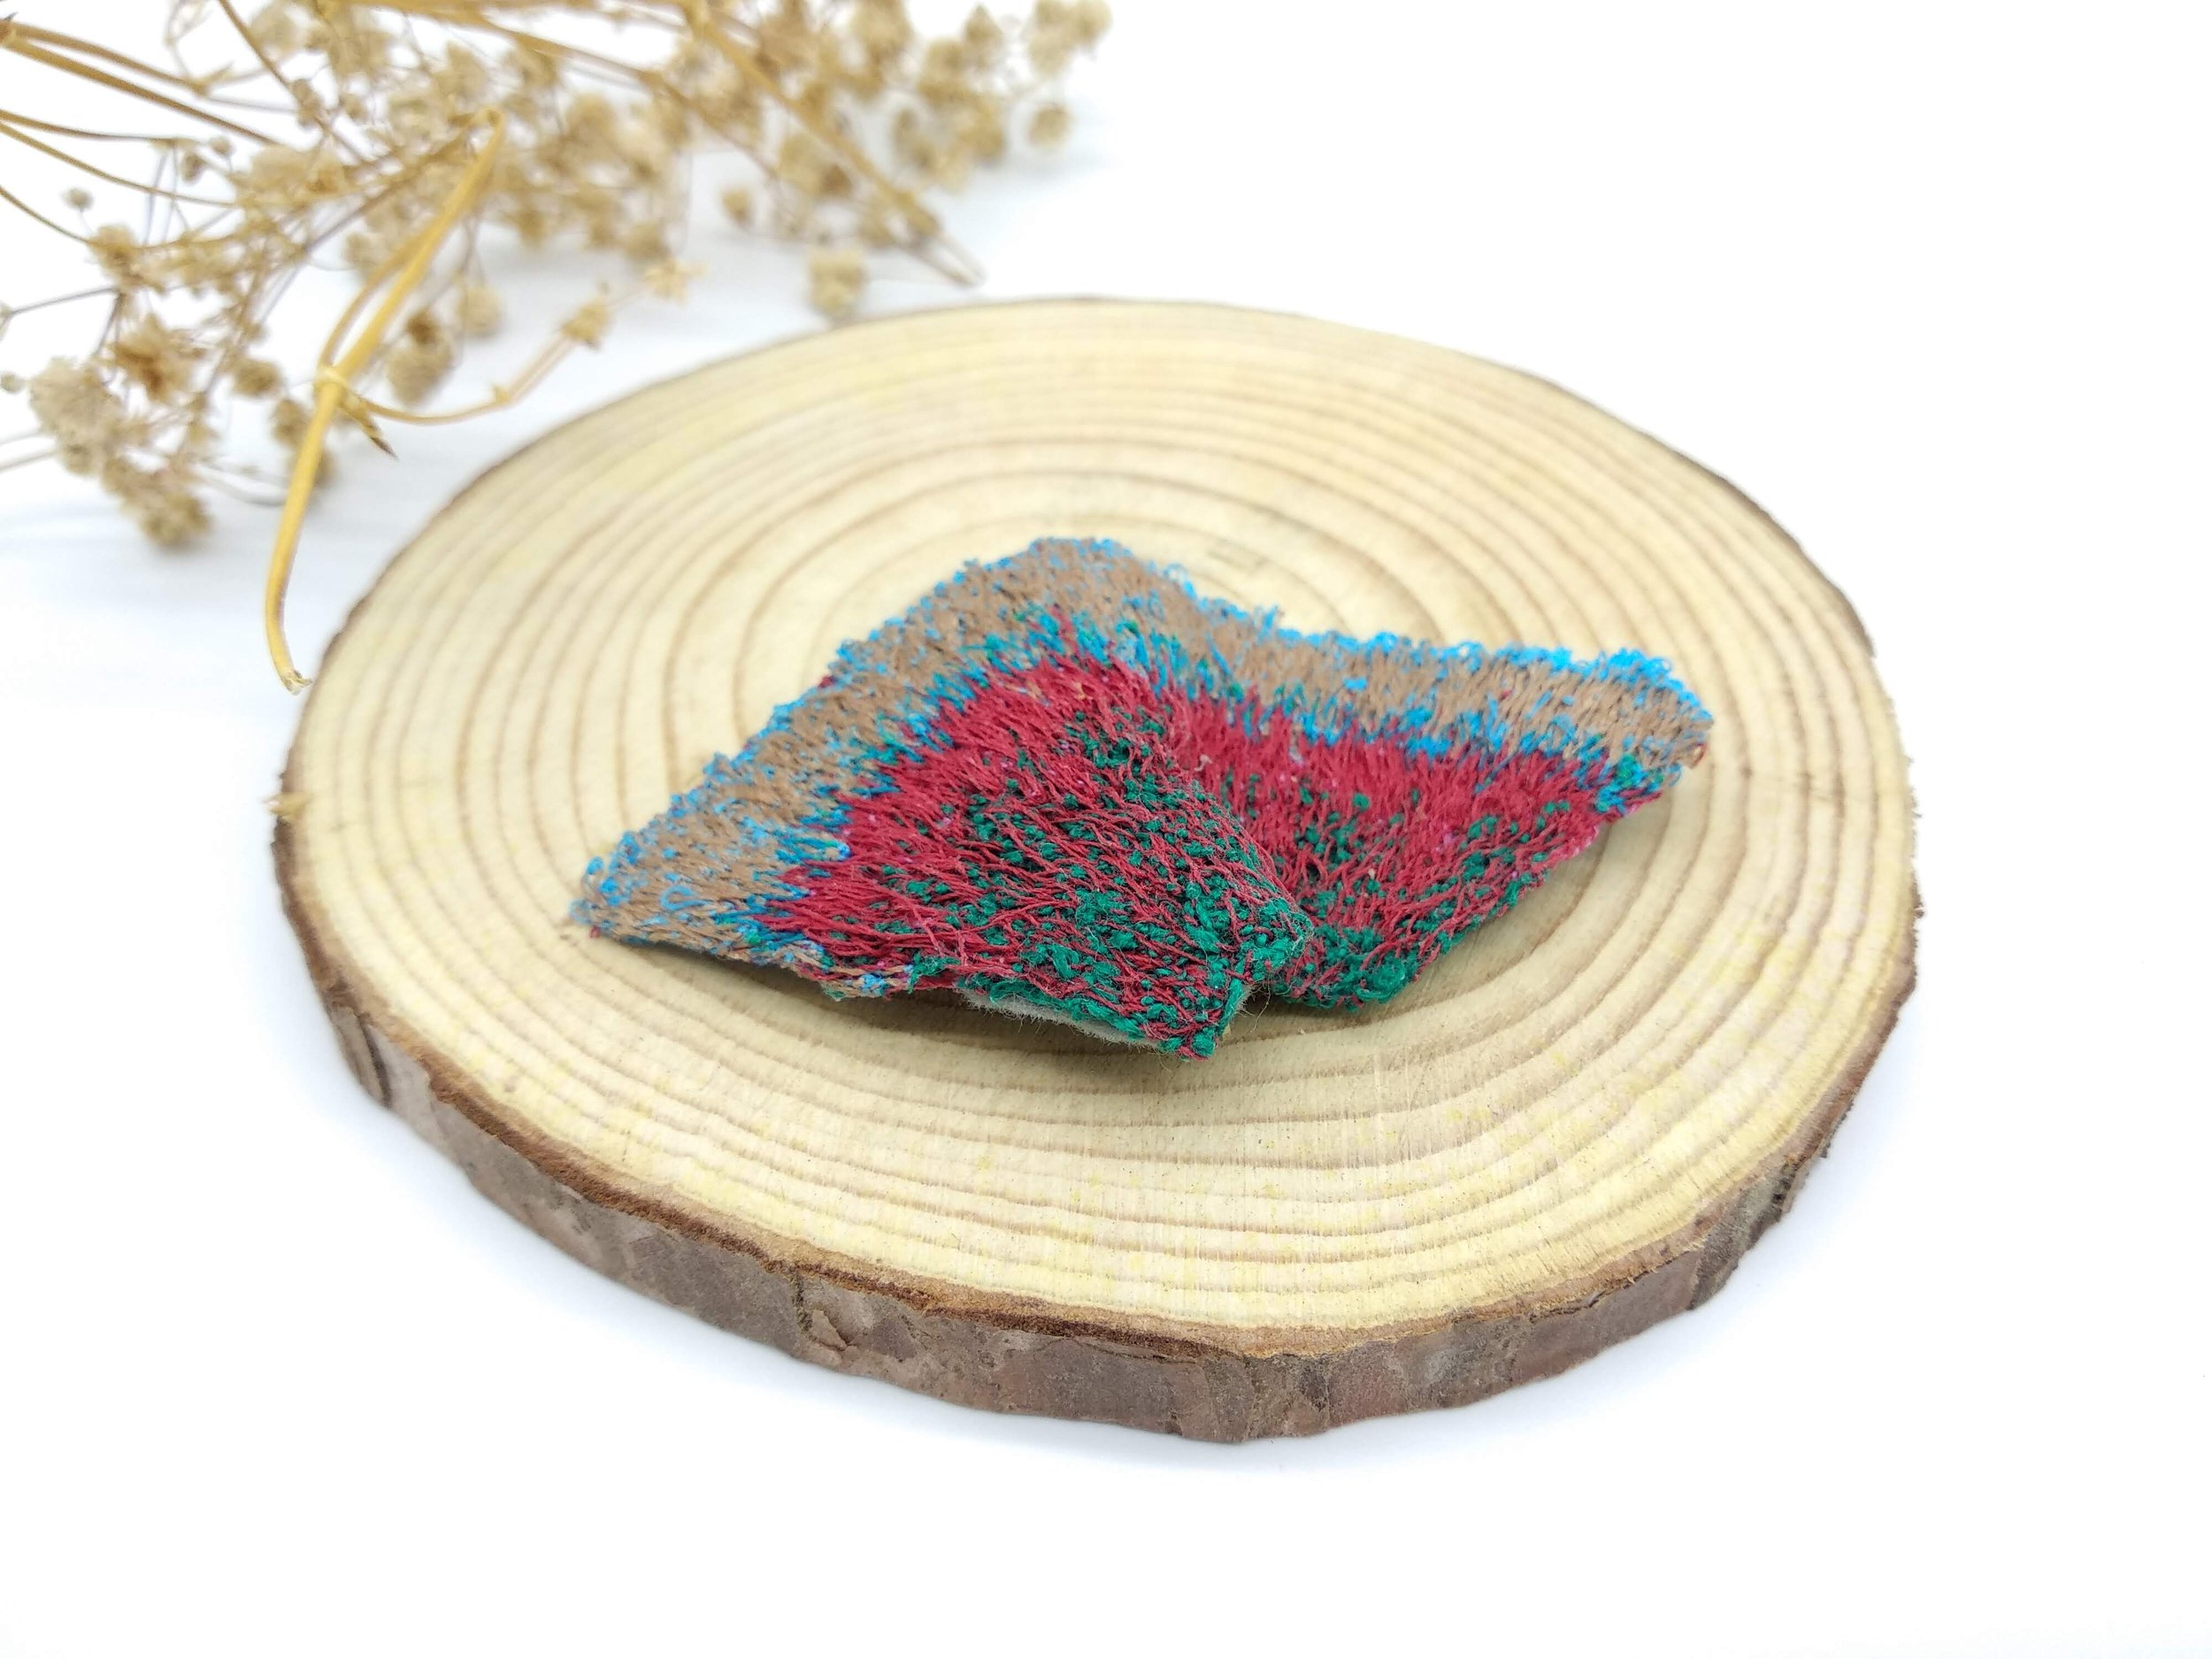 Coral art using free motion embroidery